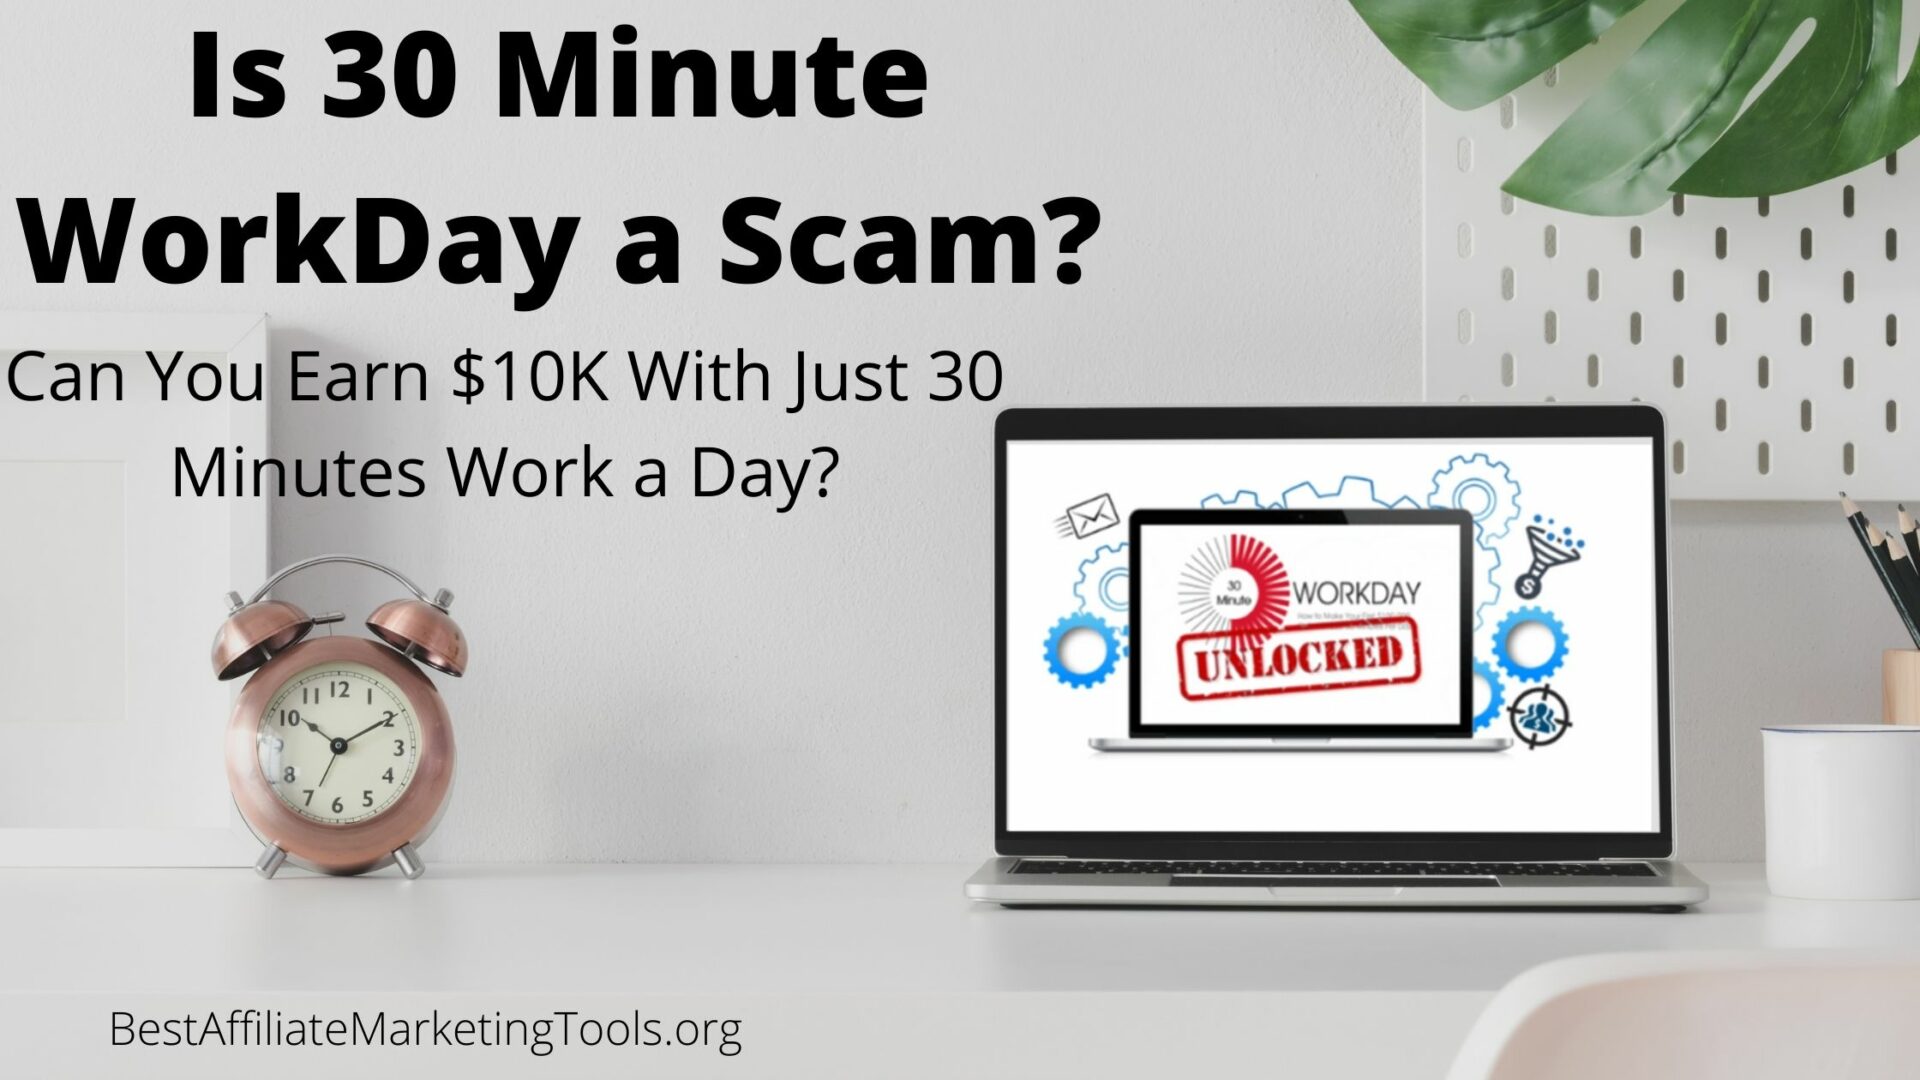 Is 30 Minute Workday a Scam